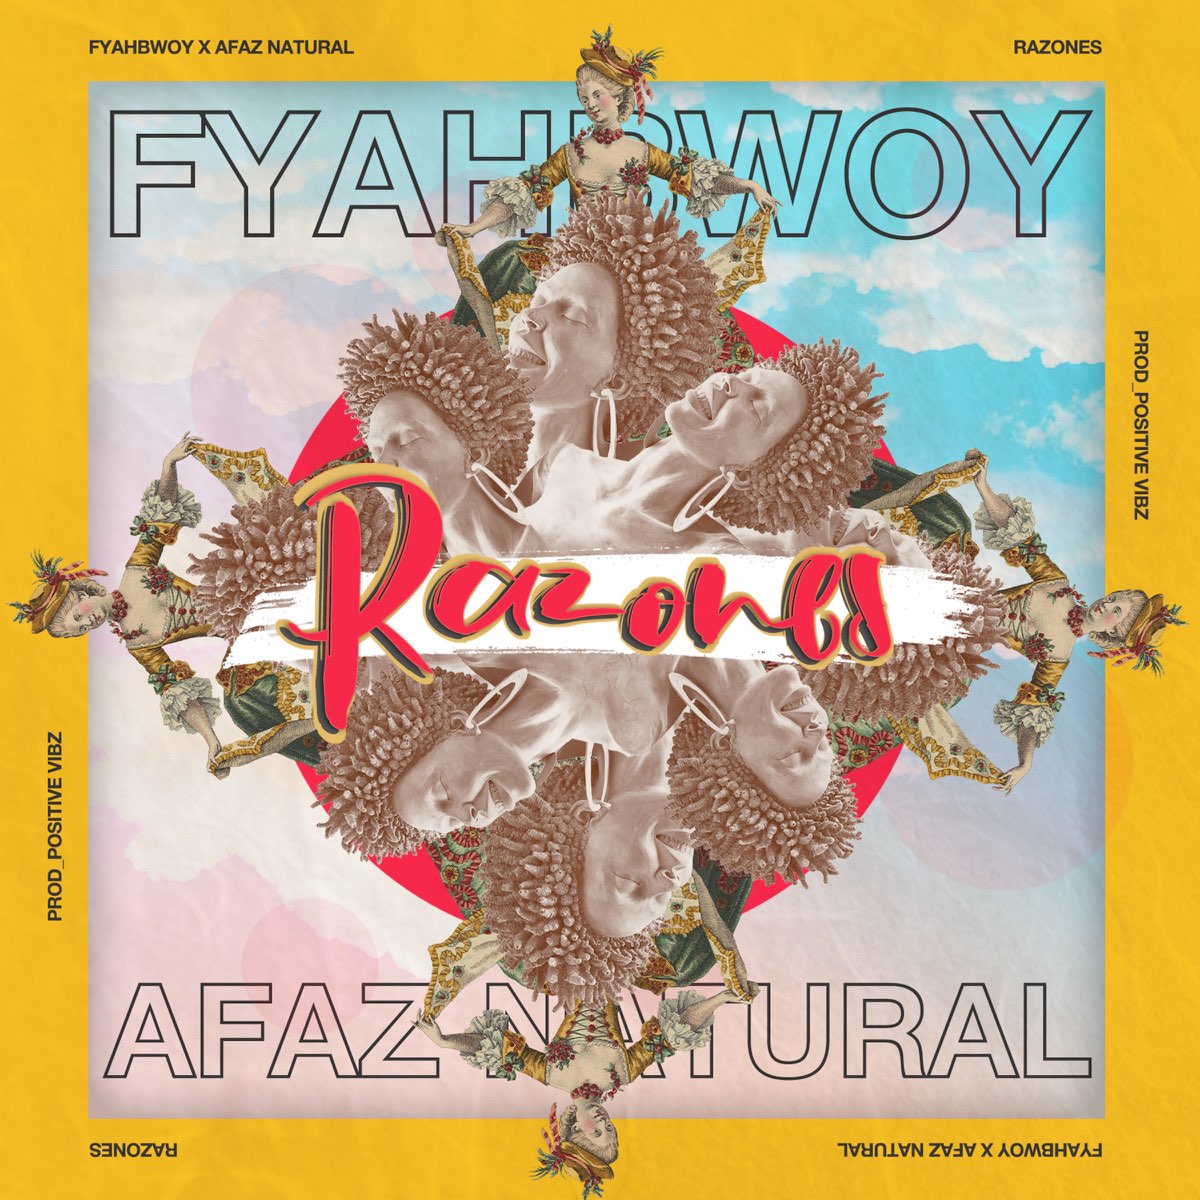 Razones - Single by Fyahbwoy & Afaz Natural on Apple Music